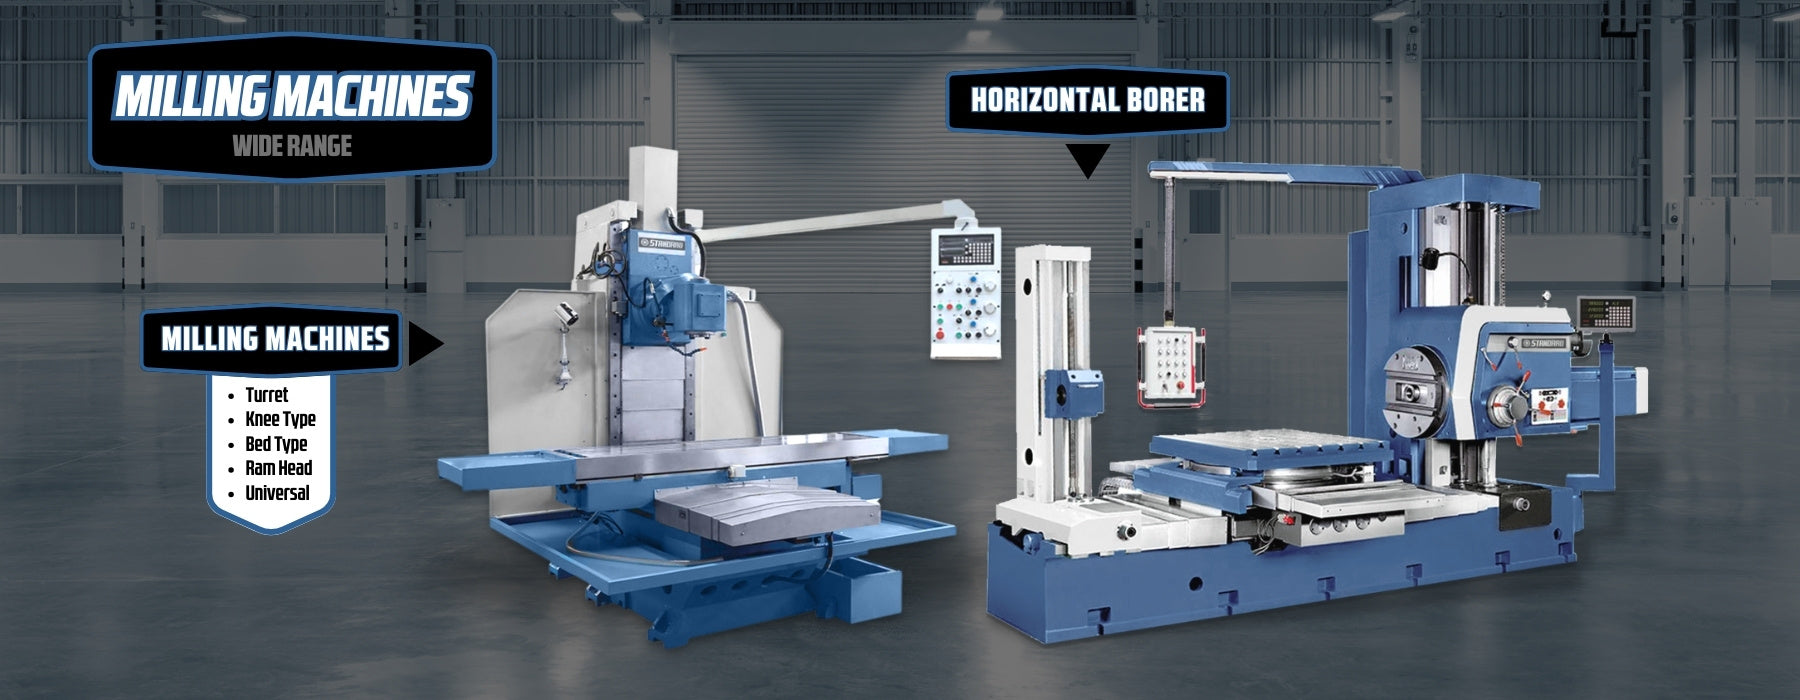 Banner for the Range of STANDARD Milling Machinery, Universal mills, bed mills and horizontal borers.